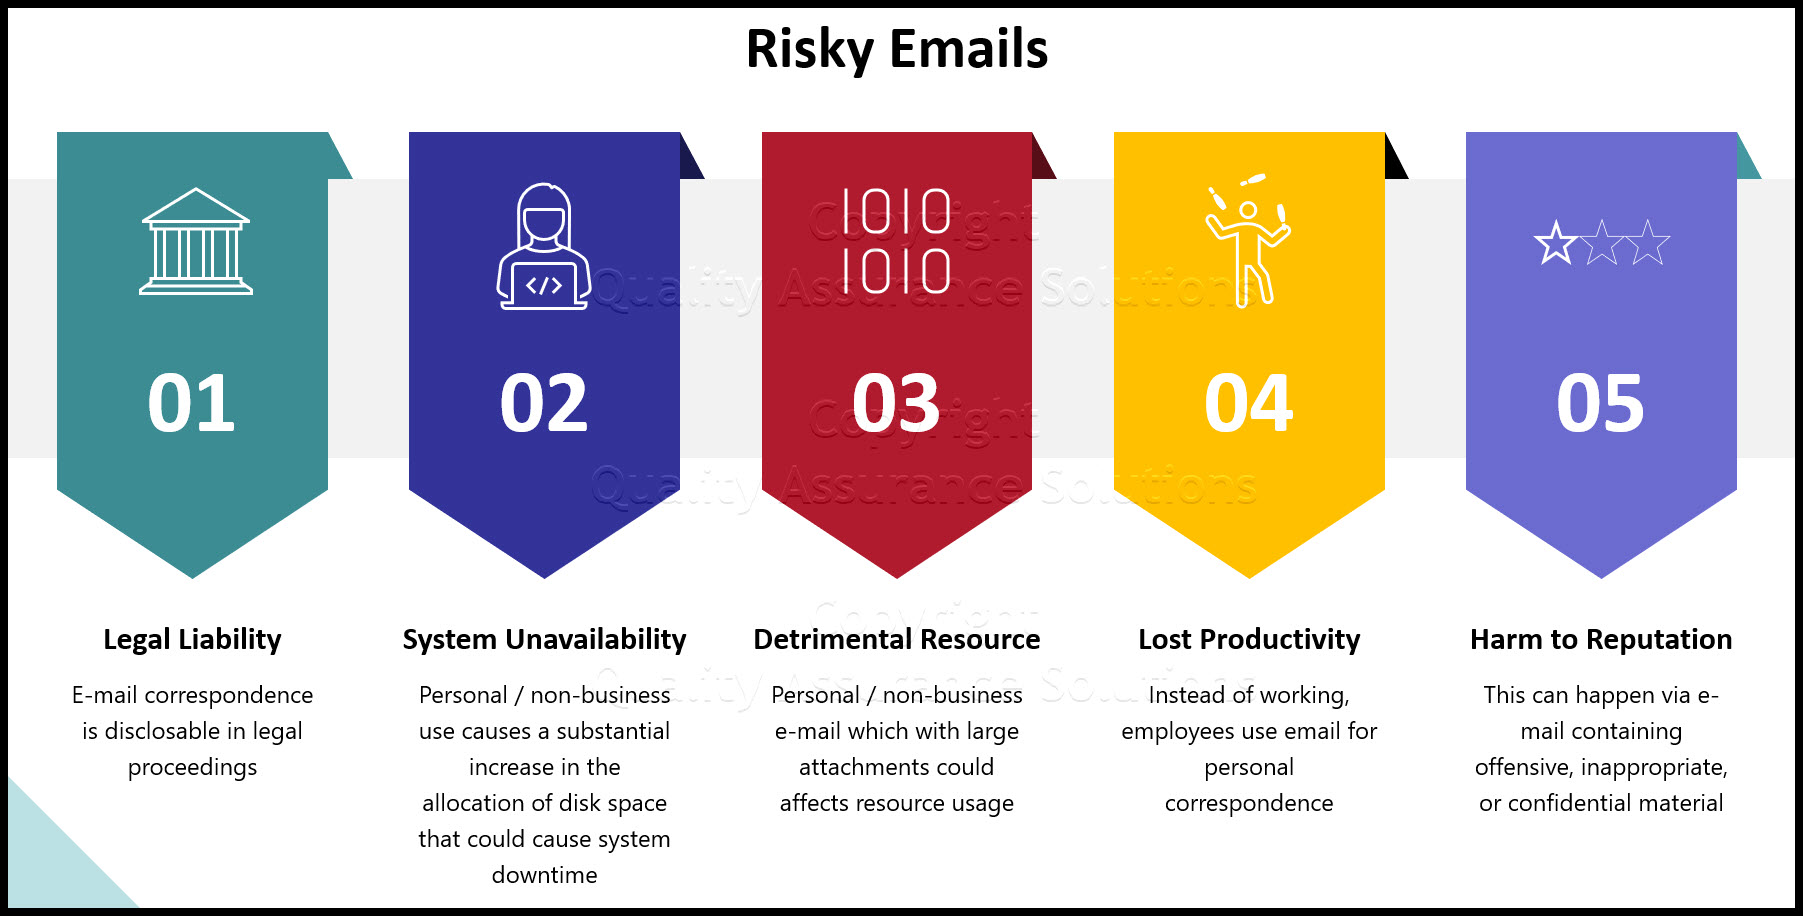 This article discusses business methods to prevent scary emails such as legal liability issues and describes other risks for allowing them.